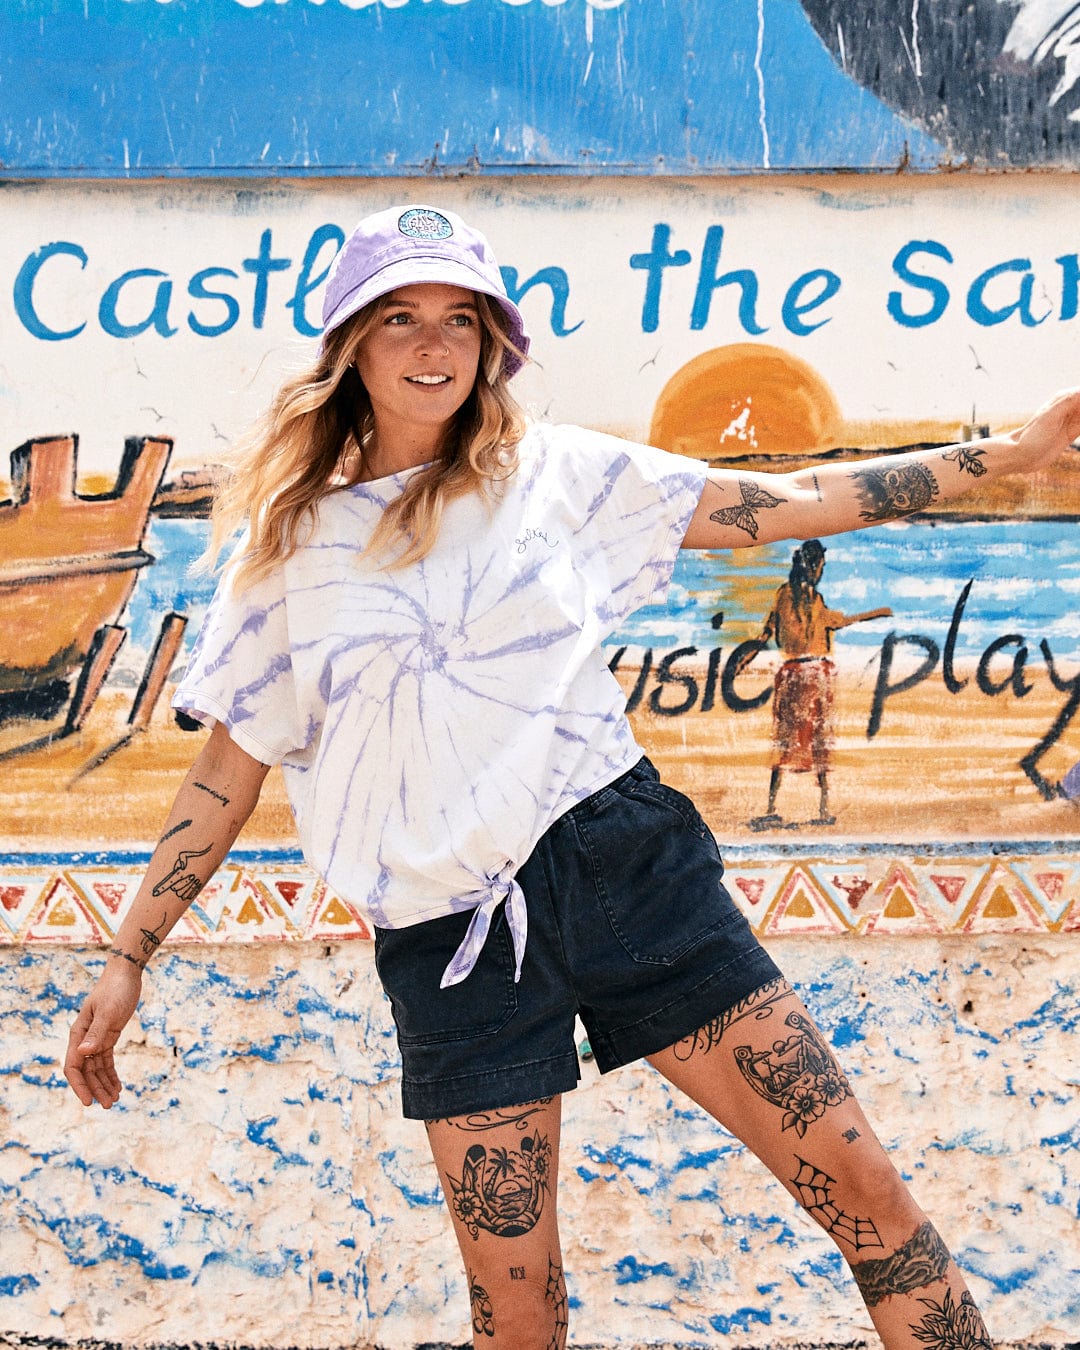 A young woman in a Swirl - Womens Short Sleeve T-Shirt - Tie Dye White/Purple by Saltrock and denim shorts smiles in front of a colorful mural titled "castle in the sand." She wears a cap and is heavily tattooed.